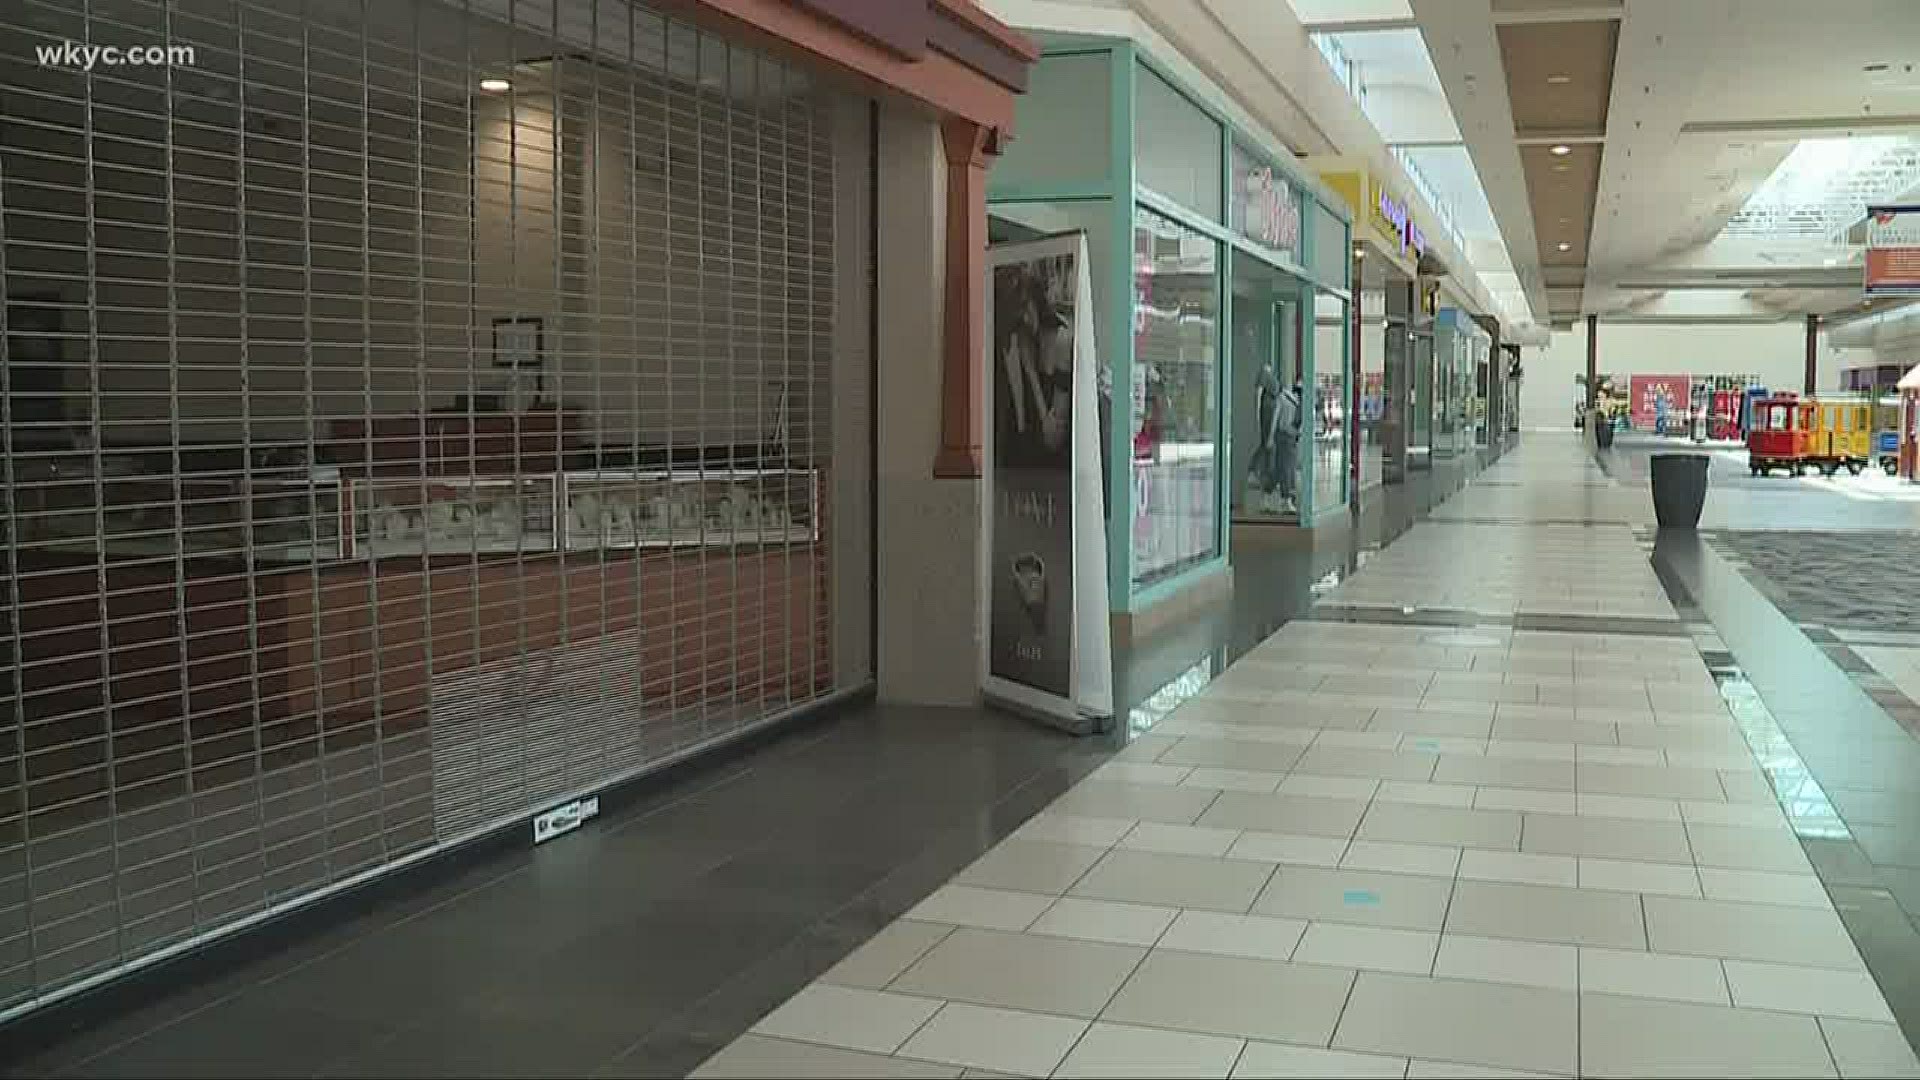 One major Lake County mall says its ready to reopen May 12. Mark Naymik explains what's in store for shoppers